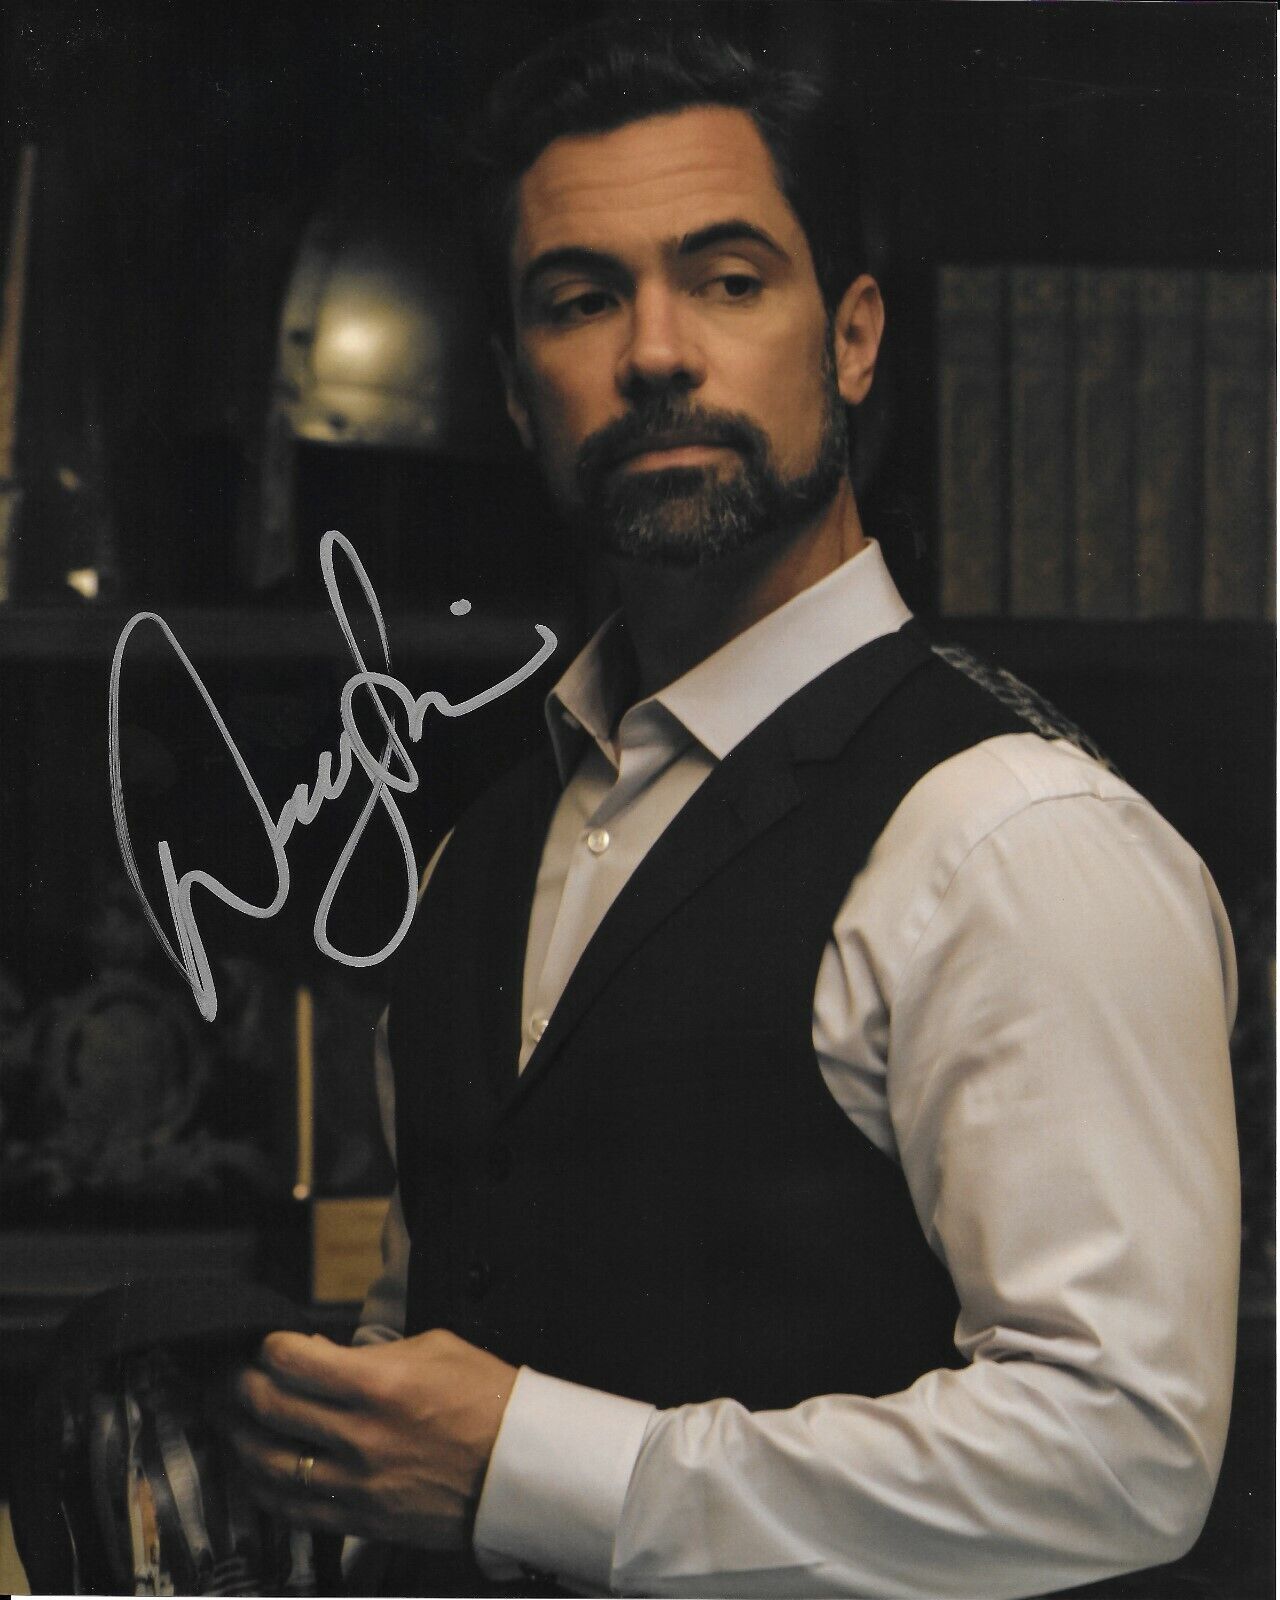 Danny Pino Mayans M.C. autographed Photo Poster painting signed 8x10 #11 Miguel Galindo